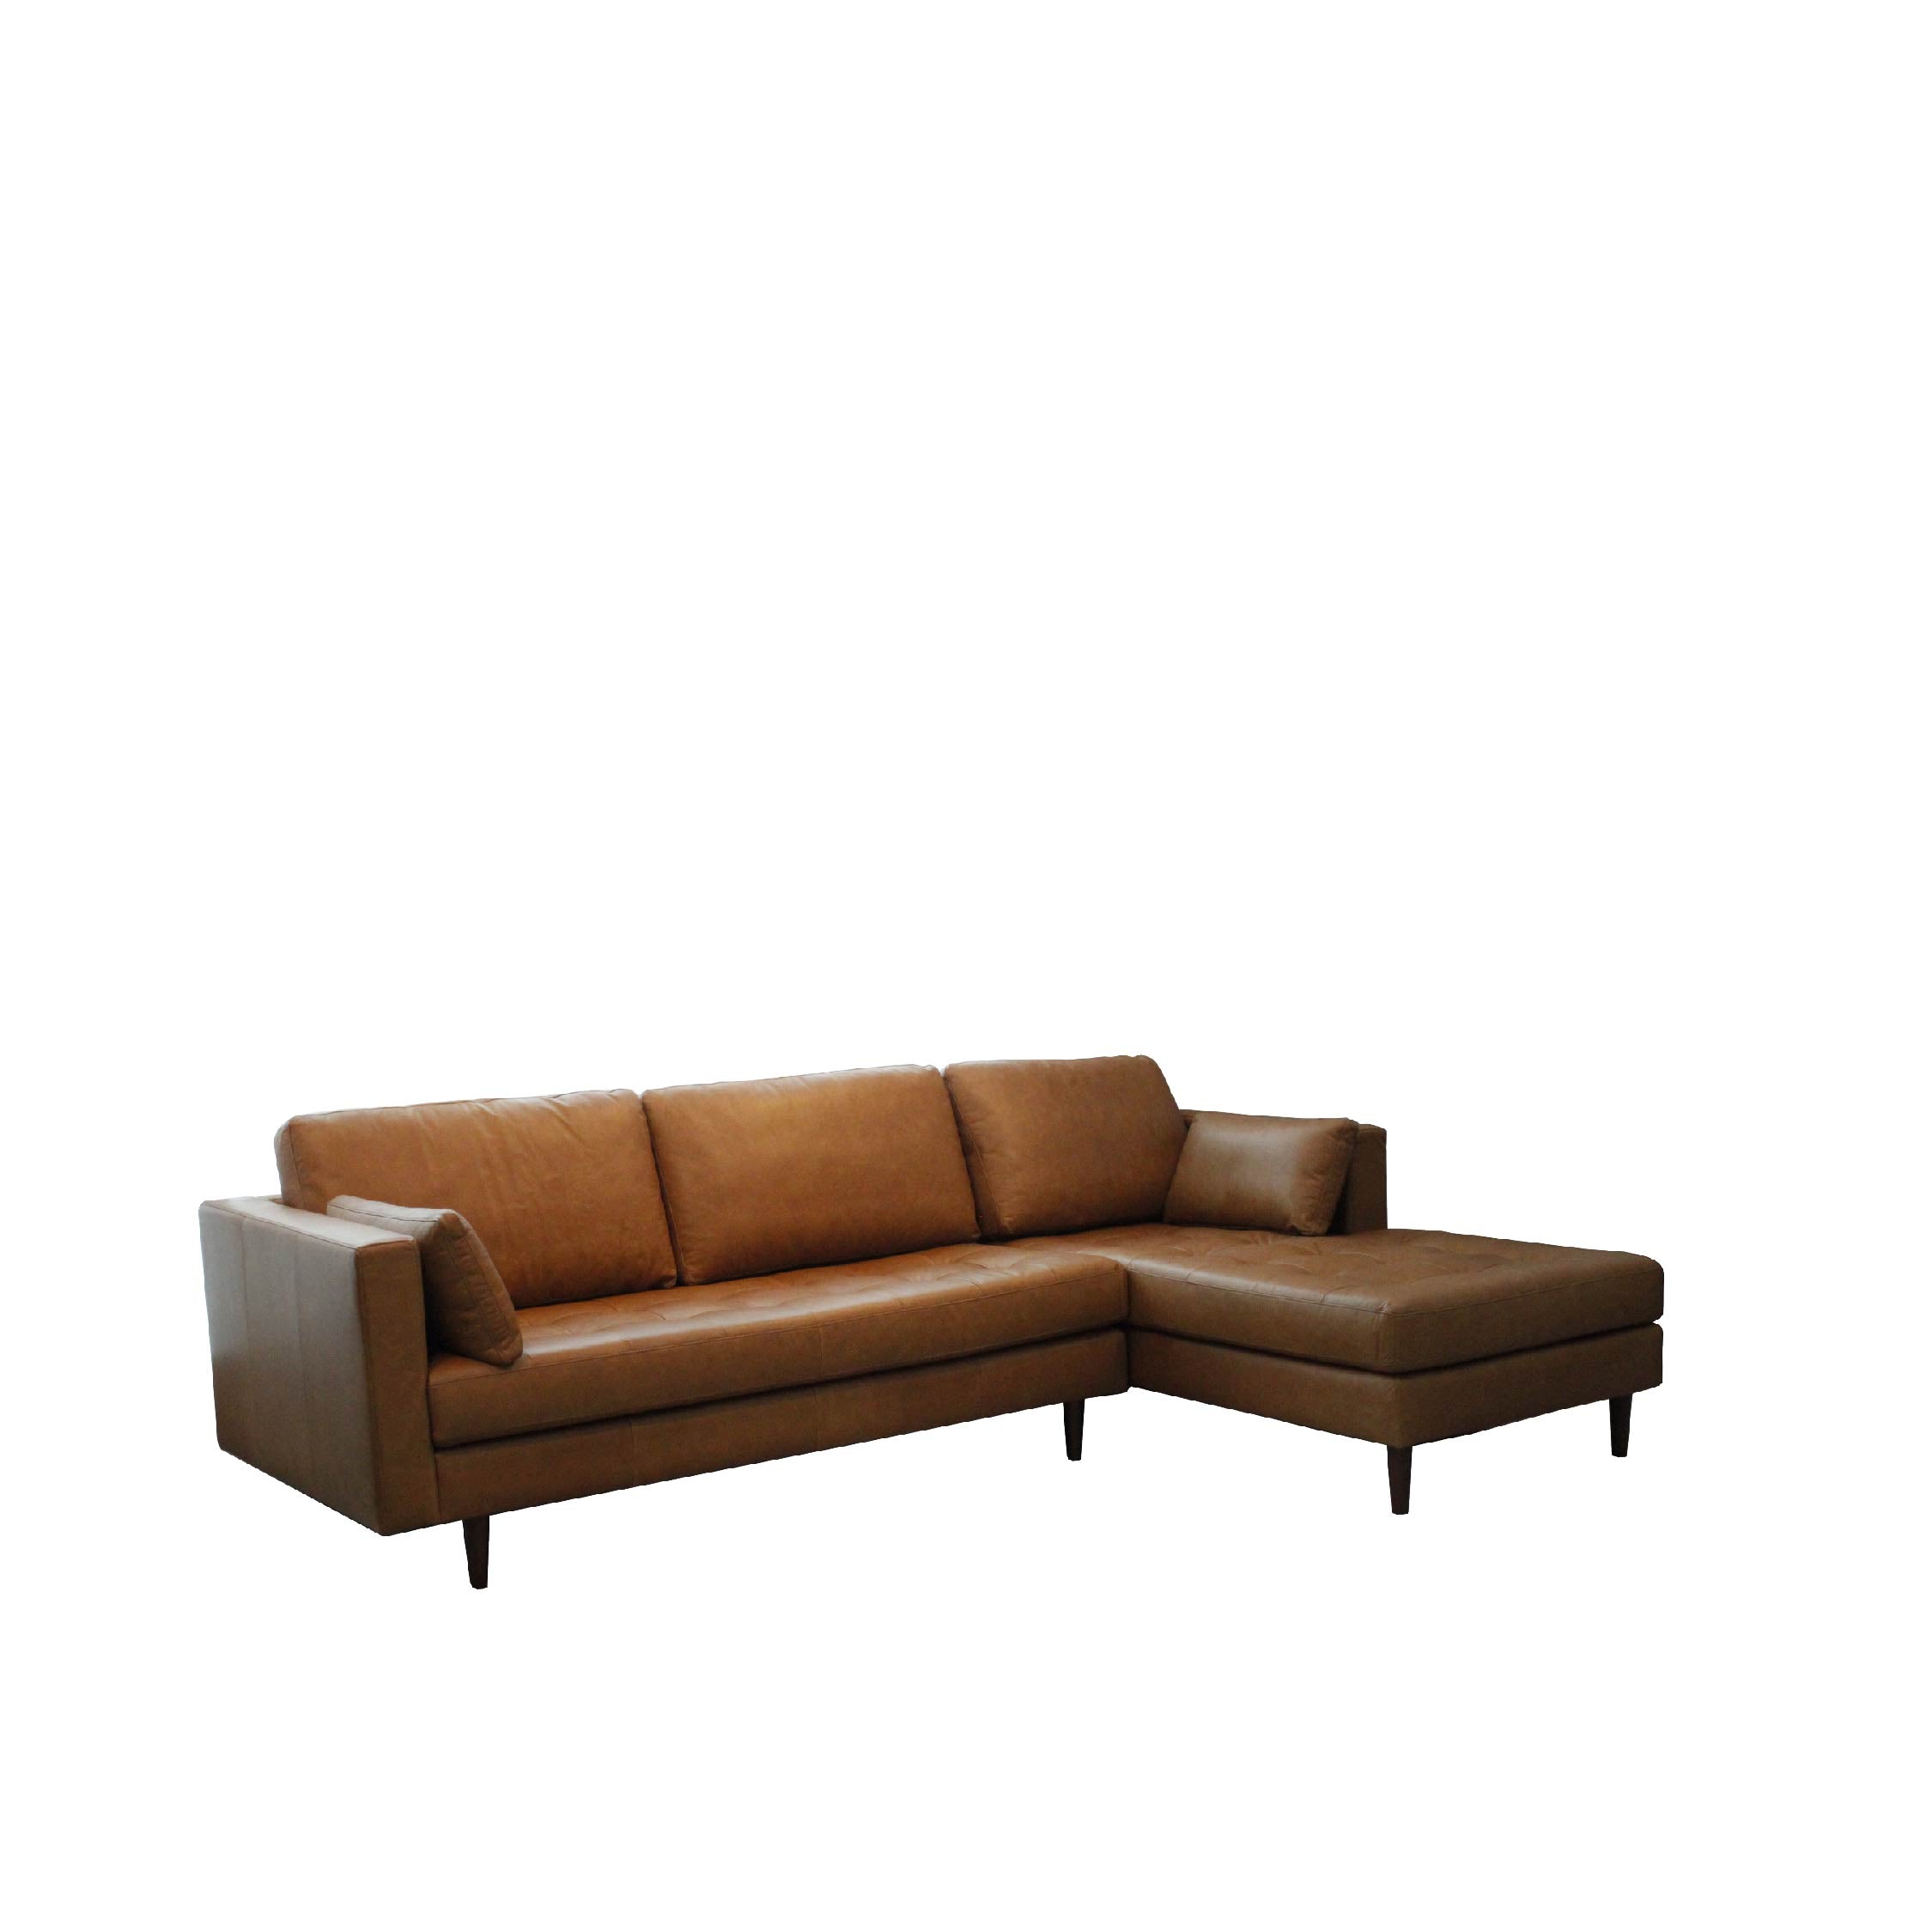 NORDI Sofa 3 Seater L Shape Right Sectional Exhibit Sale at Seremban 2 Offline Store